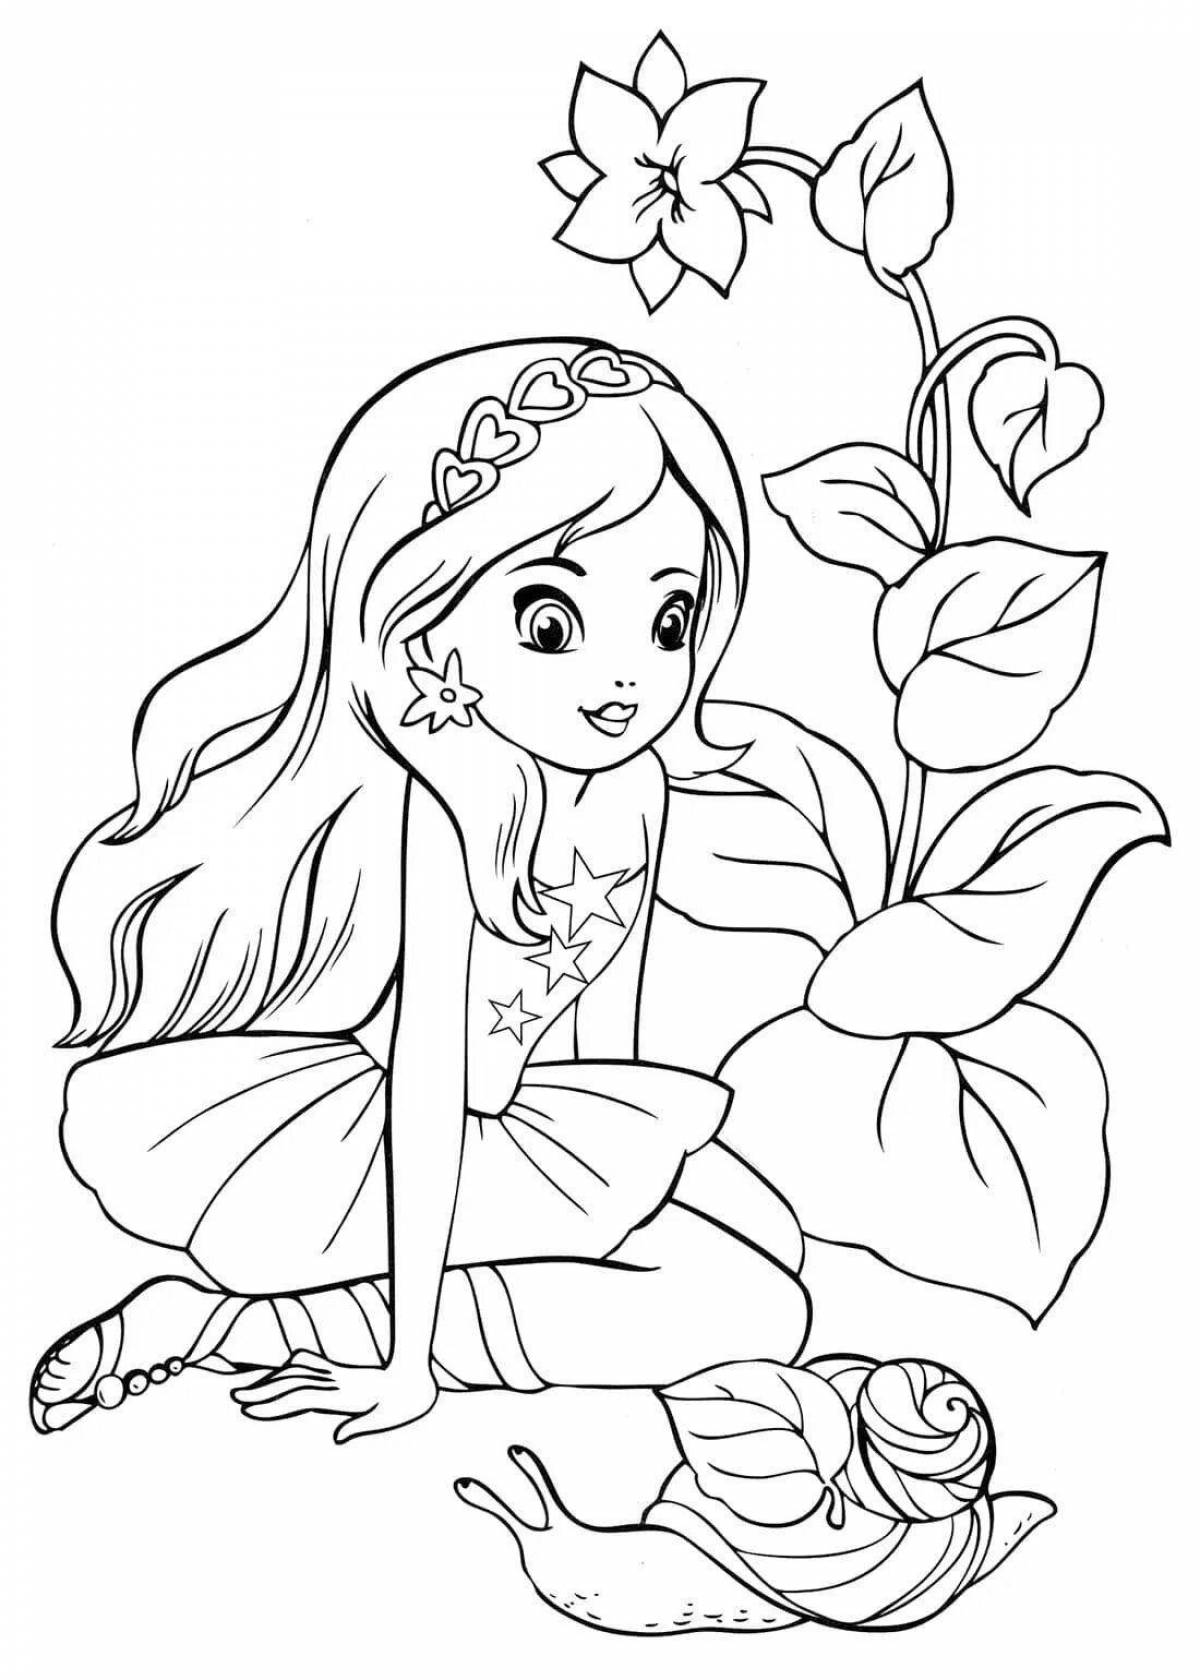 Delightful coloring for girls